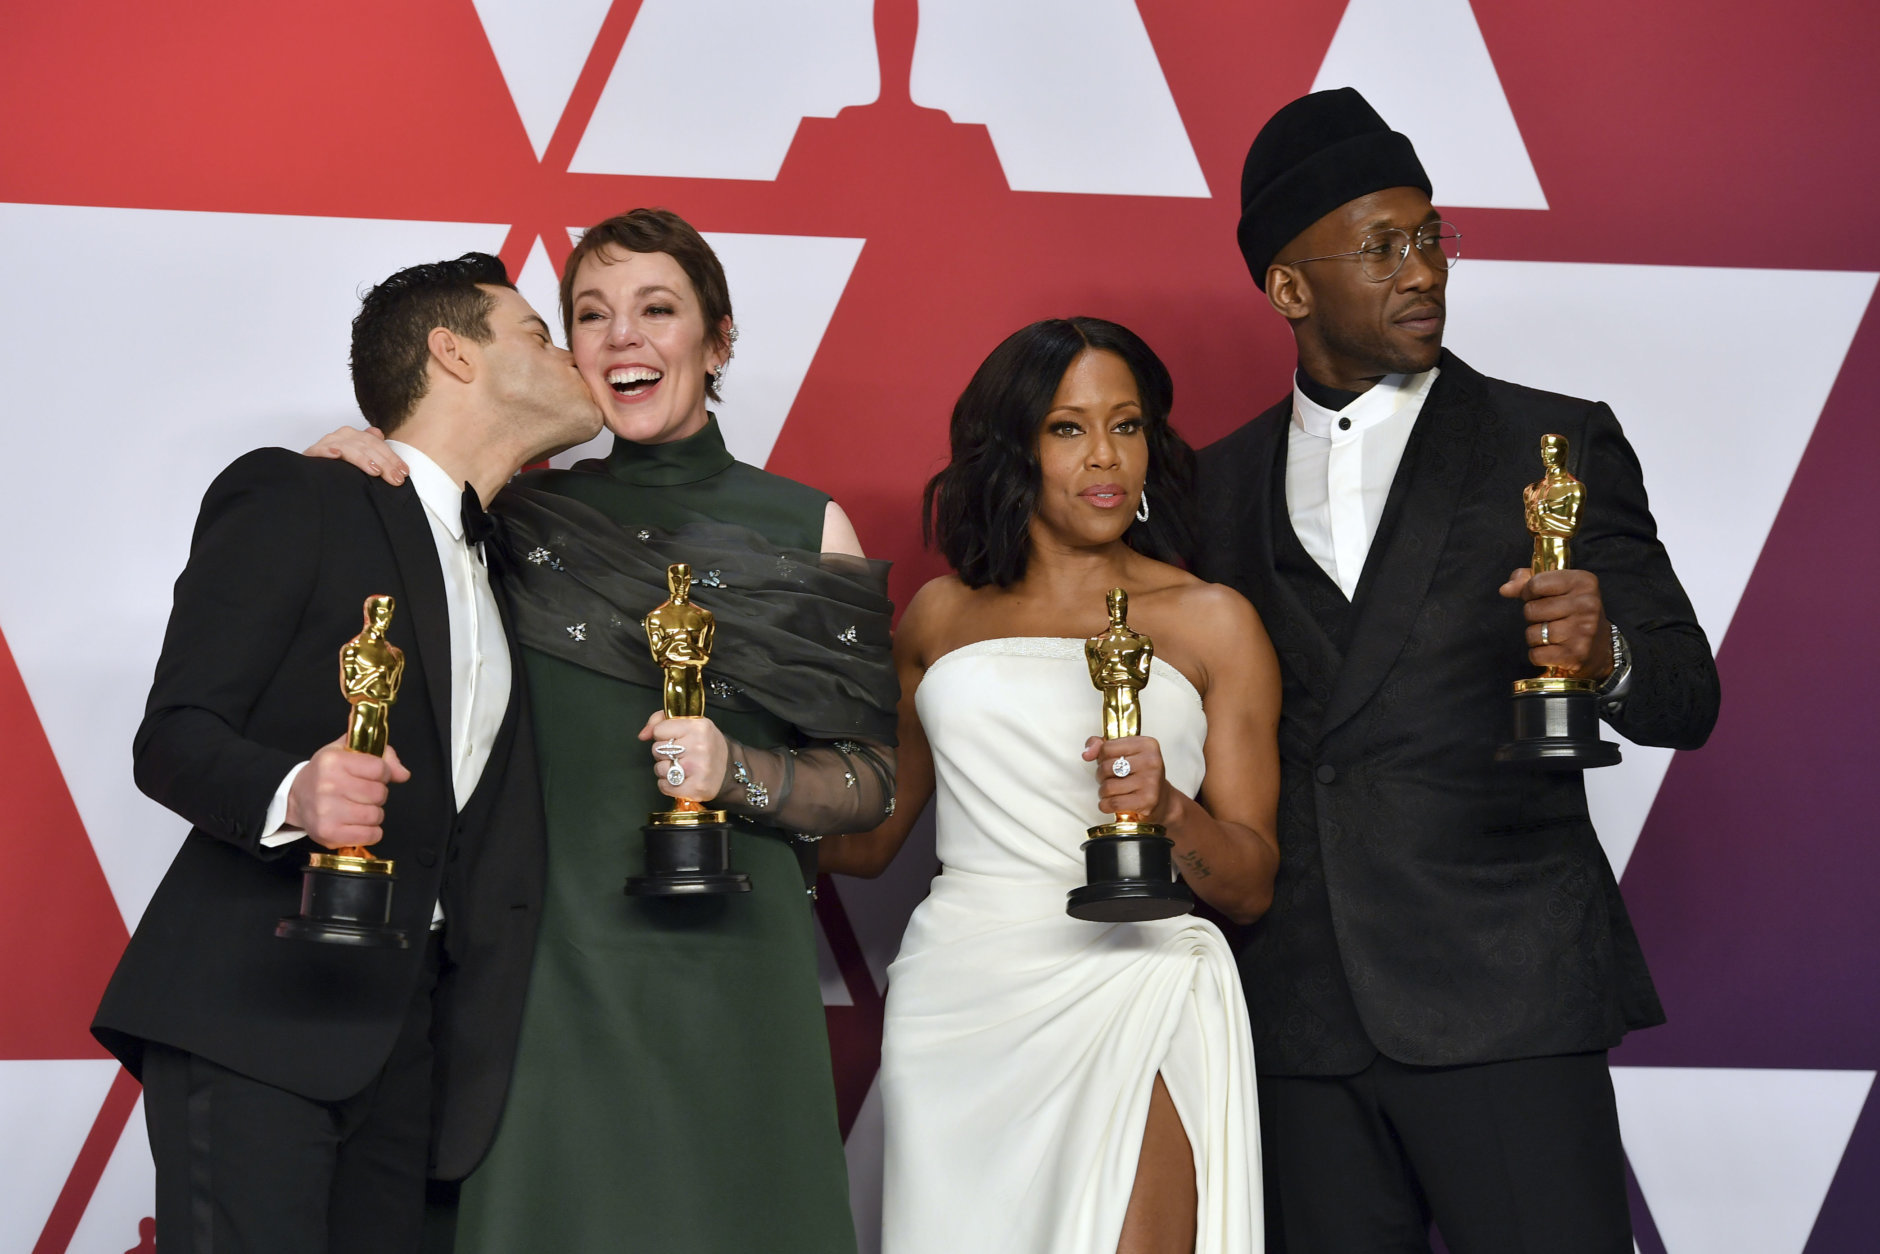 Rami Malek, left, winner of the award for best performance by an actor in a leading role for "Bohemian Rhapsody", kisses Olivia Colman, winner of the award for best performance by an actress in a leading role for "The Favourite", as they appear with Regina King, winner of the award for best performance by an actress in a supporting role for "If Beale Street Could Talk", and Mahershala Ali, winner of the award for best performance by an actor in a supporting role for "Green Book", right, in the press room at the Oscars on Sunday, Feb. 24, 2019, at the Dolby Theatre in Los Angeles. (Photo by Jordan Strauss/Invision/AP)